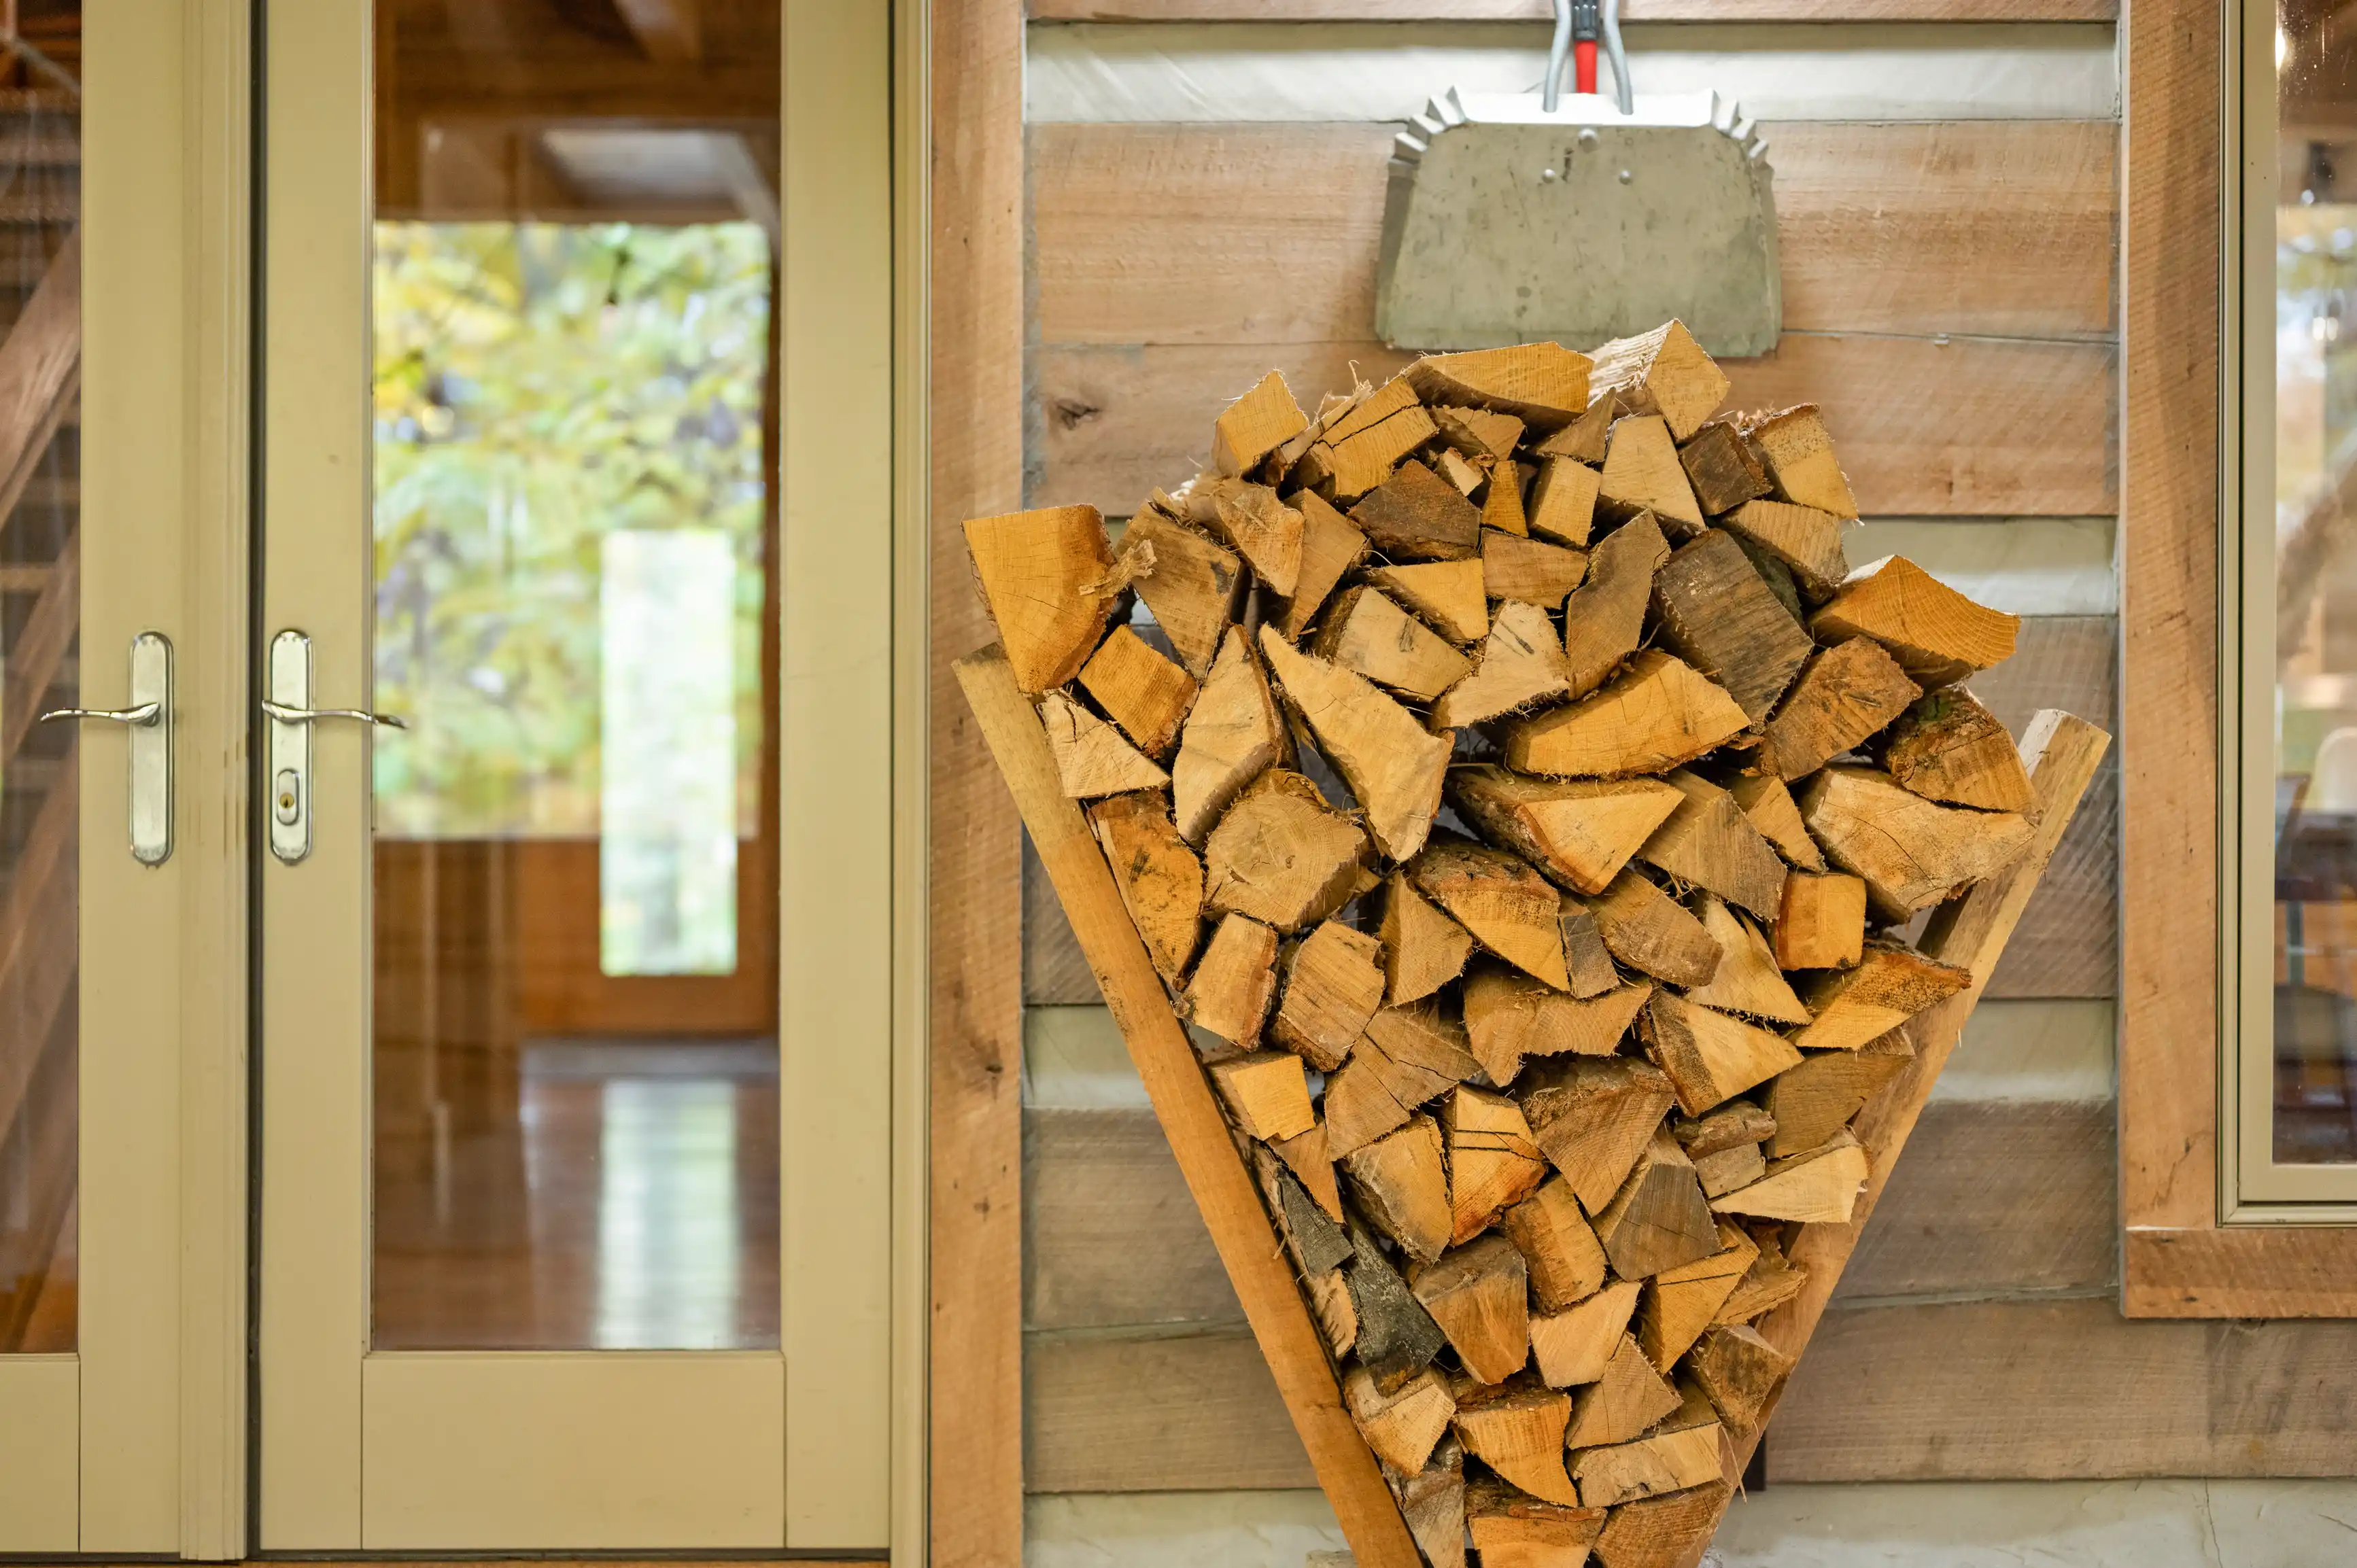 A neatly stacked pile of firewood contained within a wooden holder against a wall next to glass doors.